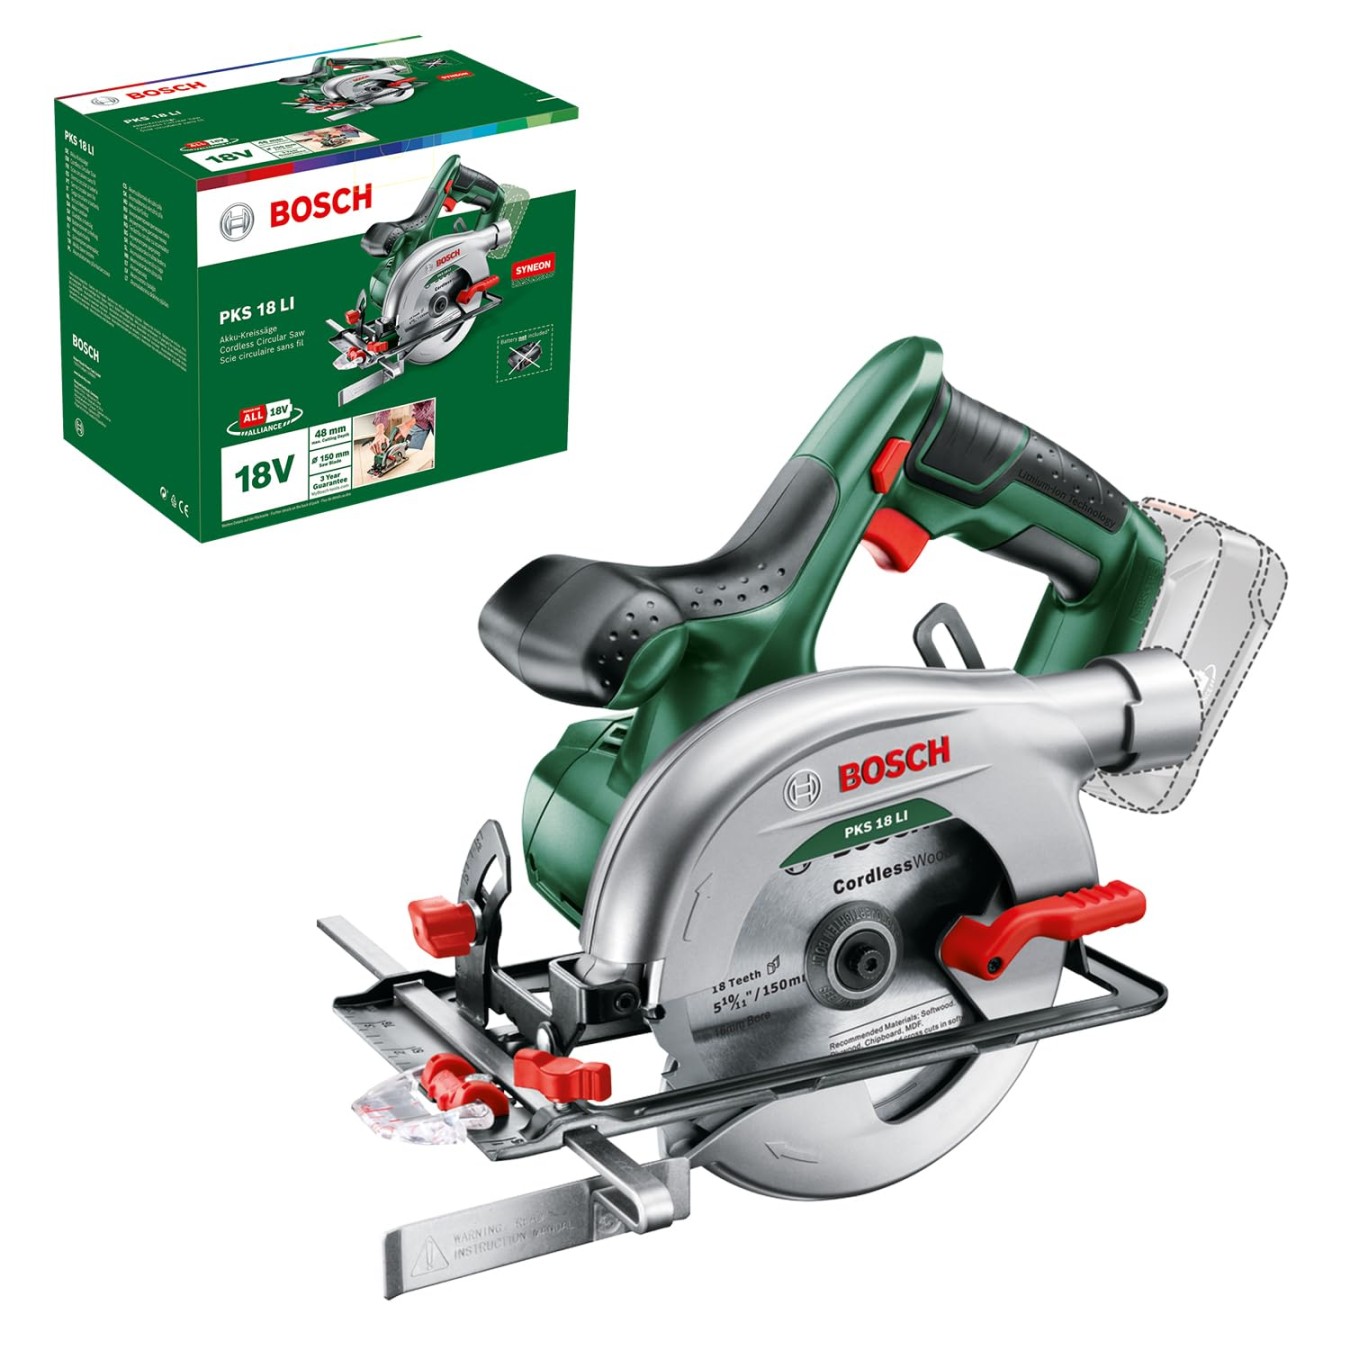 bosch-cordless-circular-saw-pks-li-without-battery-volt-system-in-carton-packaging Cordless Circular Saw Review: Cutting Power Without the Cord picture